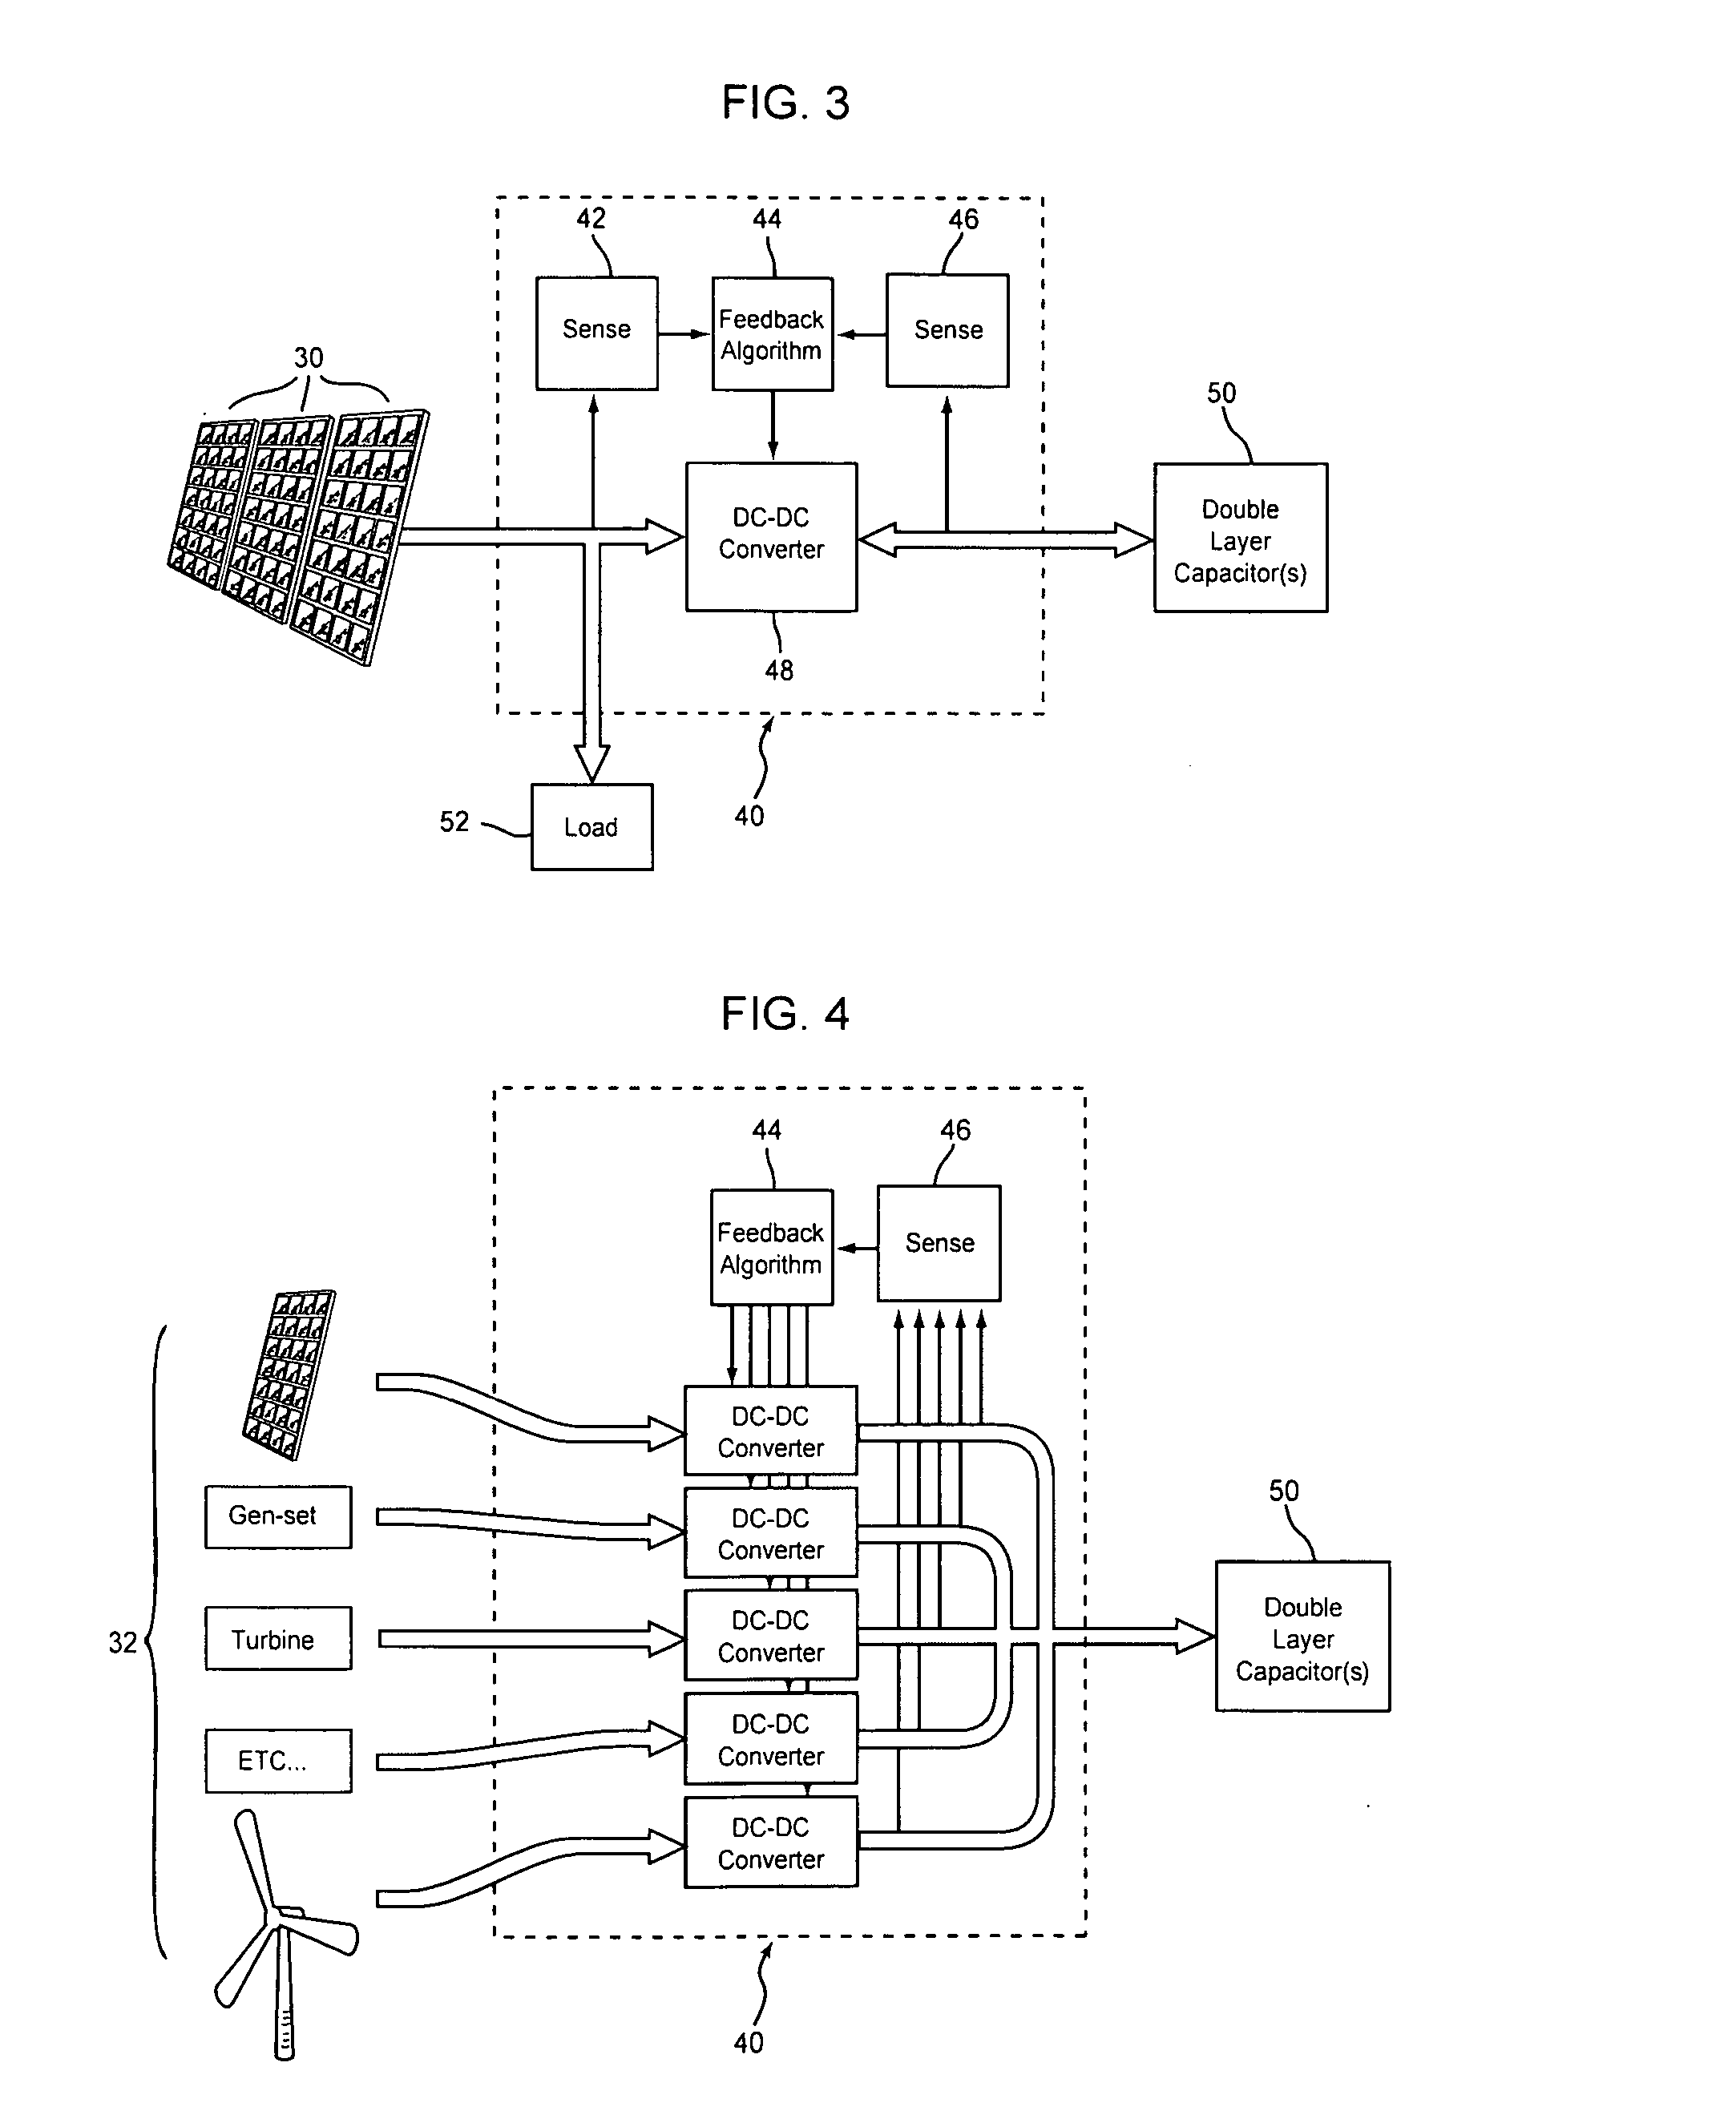 Maximum power point tracking charge controller for double layer capacitors